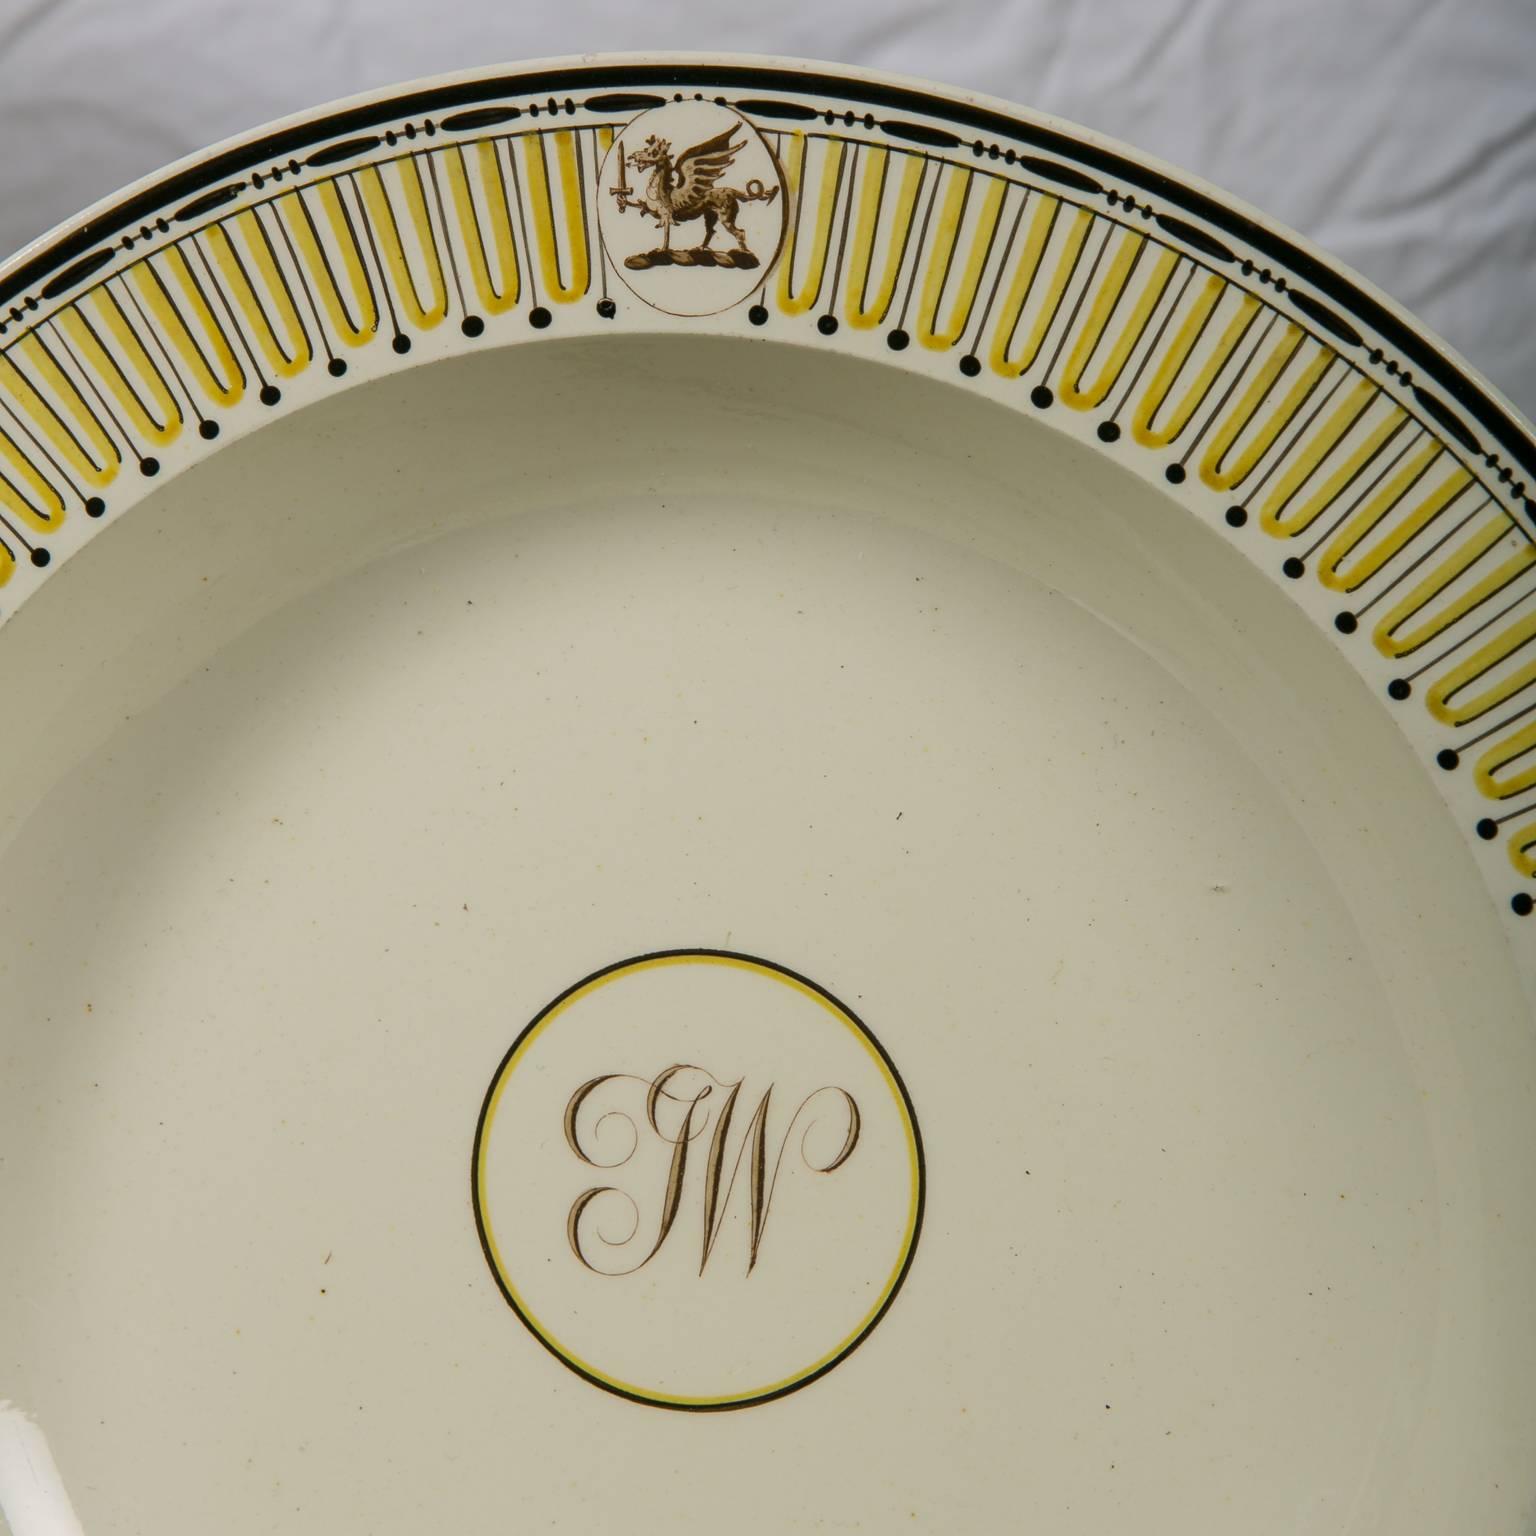 Set of Wedgwood creamware dishes made in the 18th century with a border in the distinctive, geometric, pattern known as 